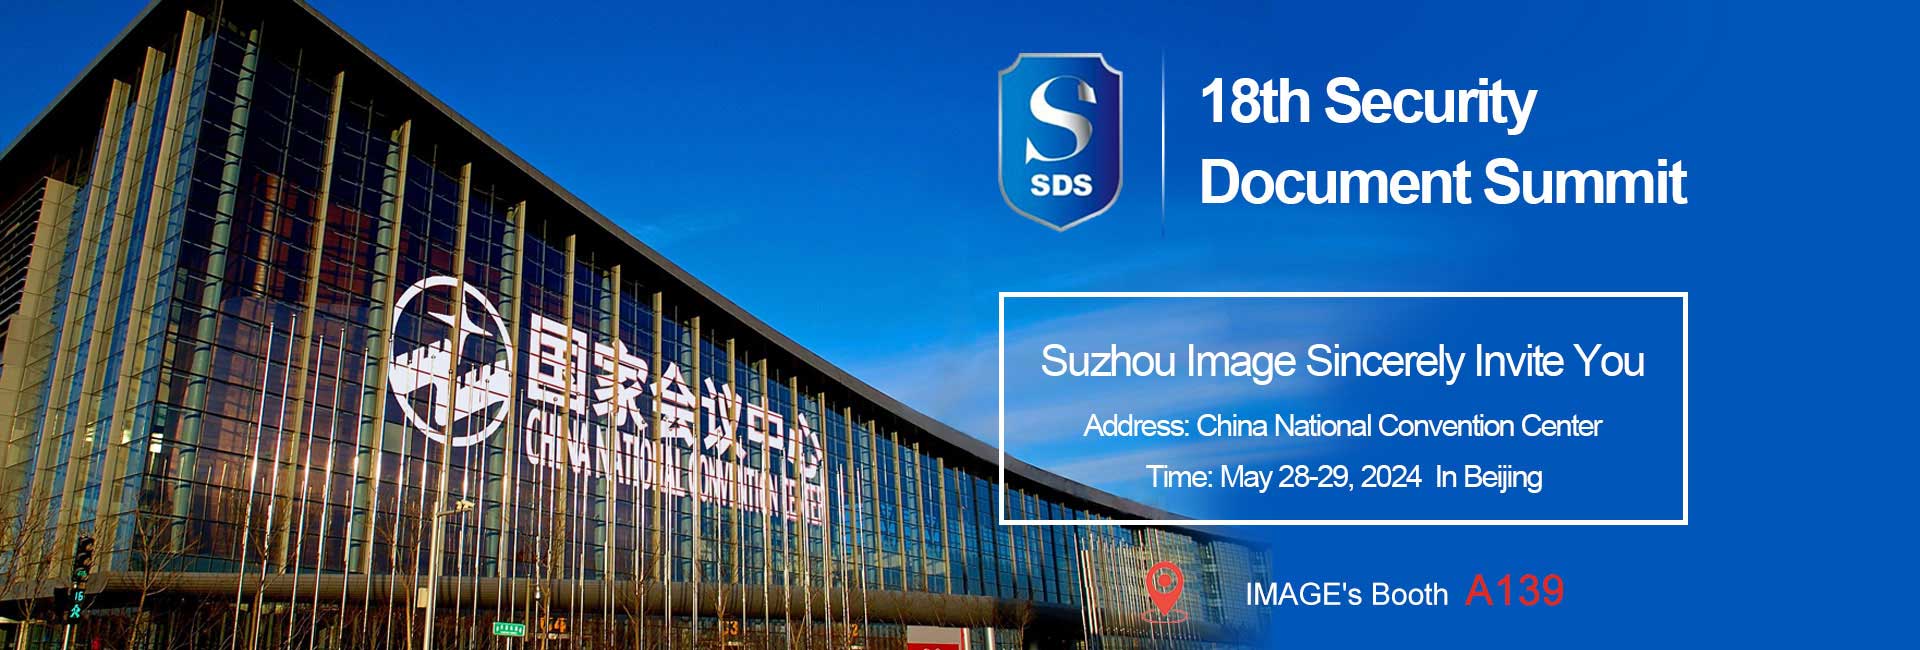 Suzhou Image will attend the 18th Security Document Summit in Beijing, China